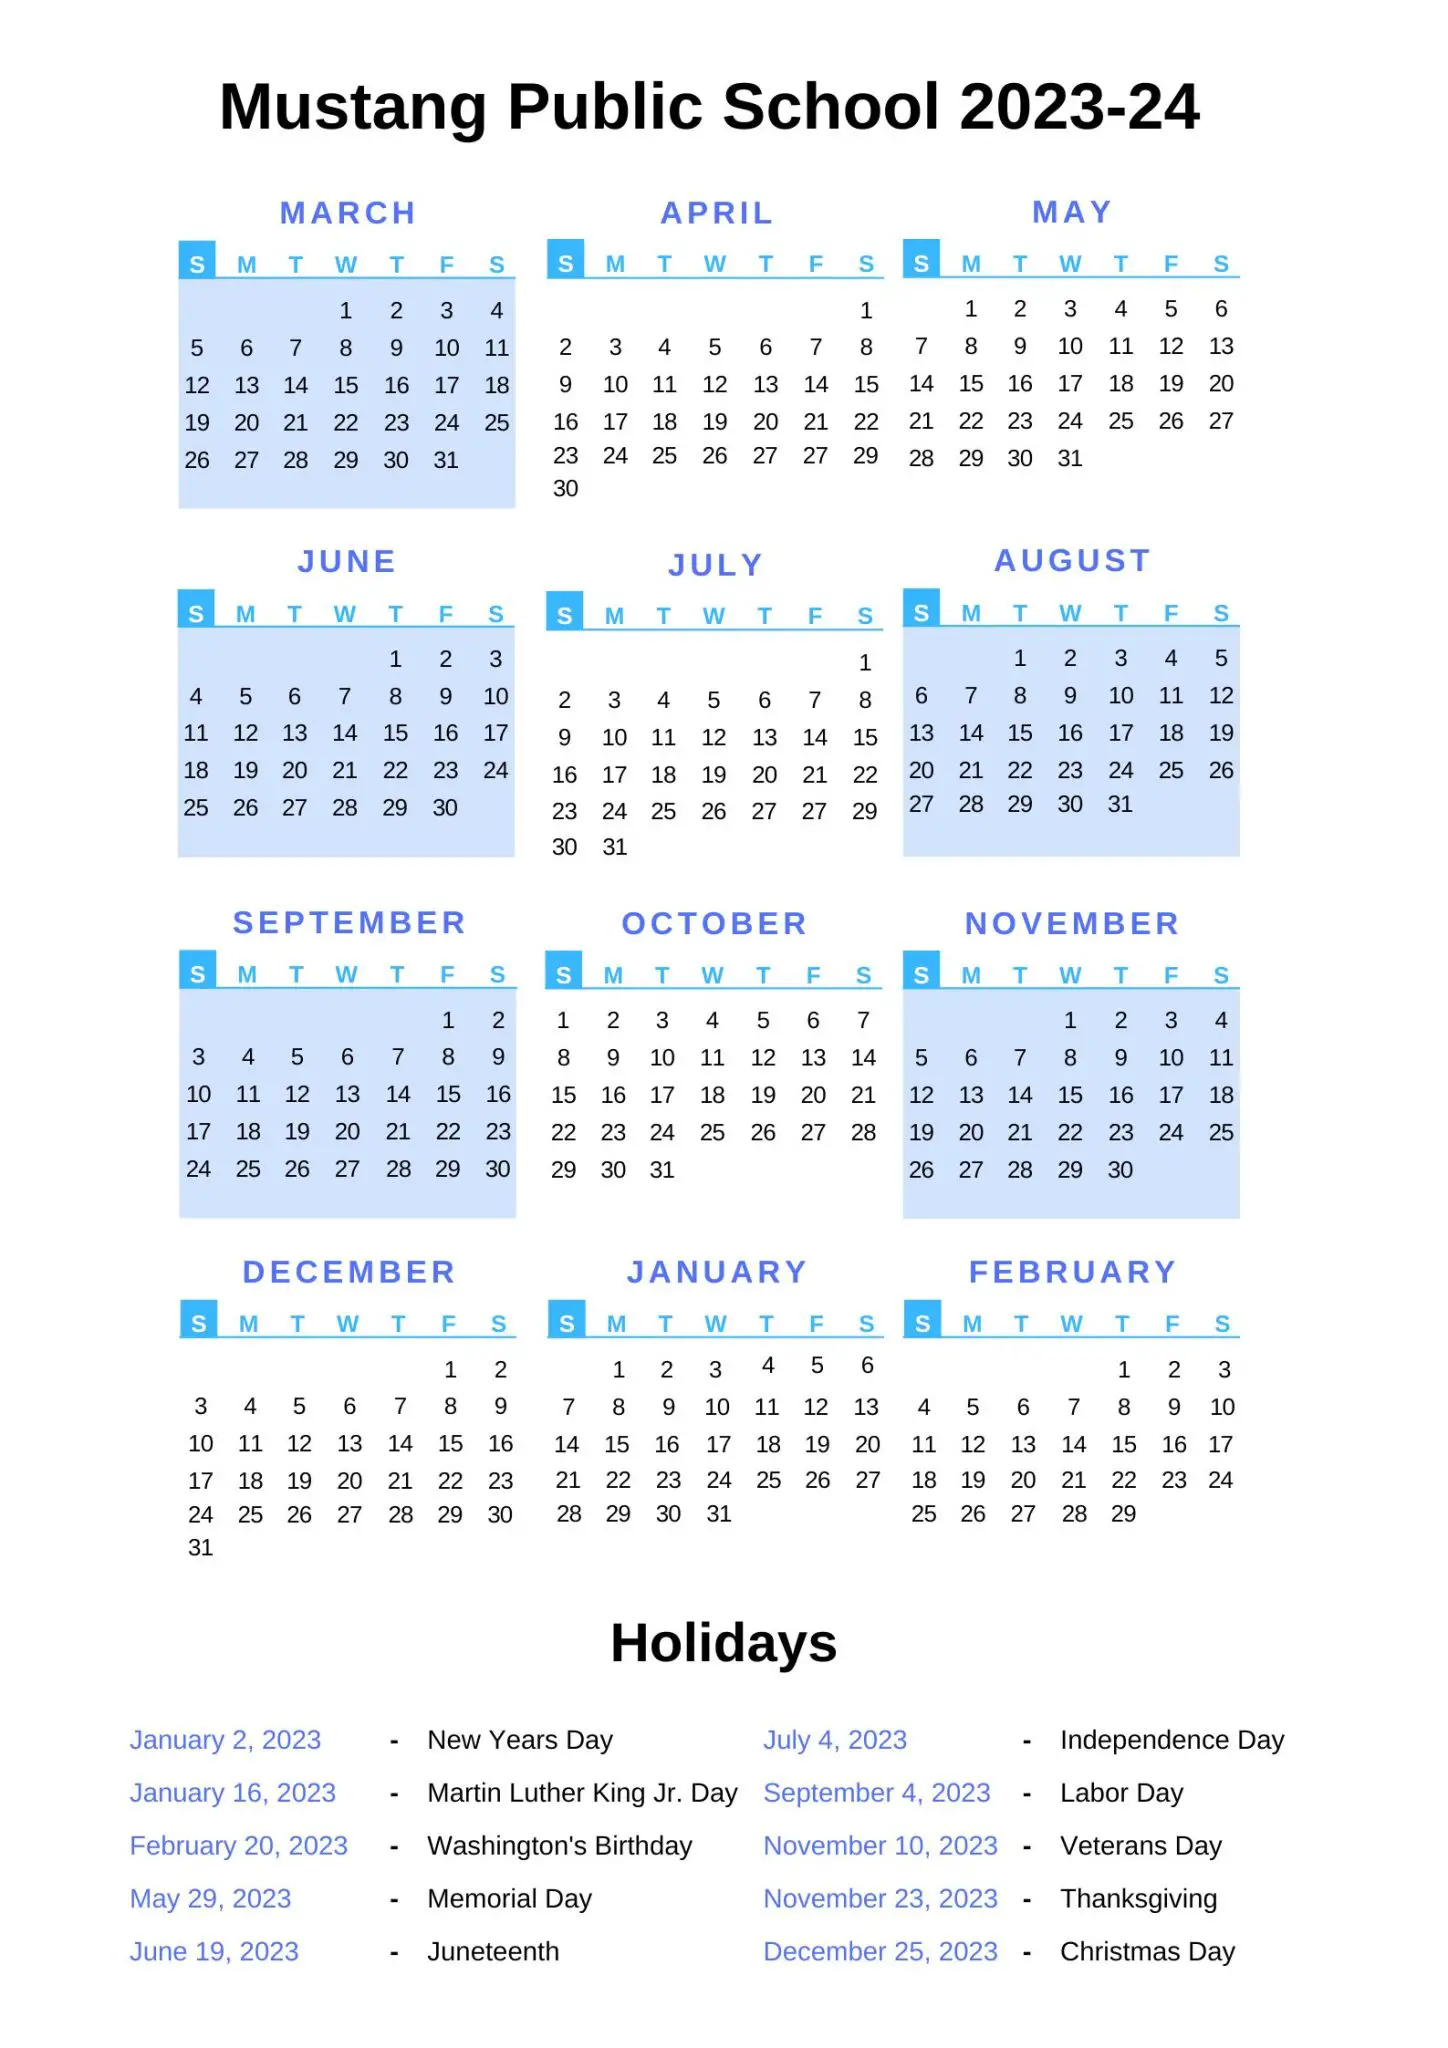 mustang-public-schools-calendar-mps-2023-24-with-holidays